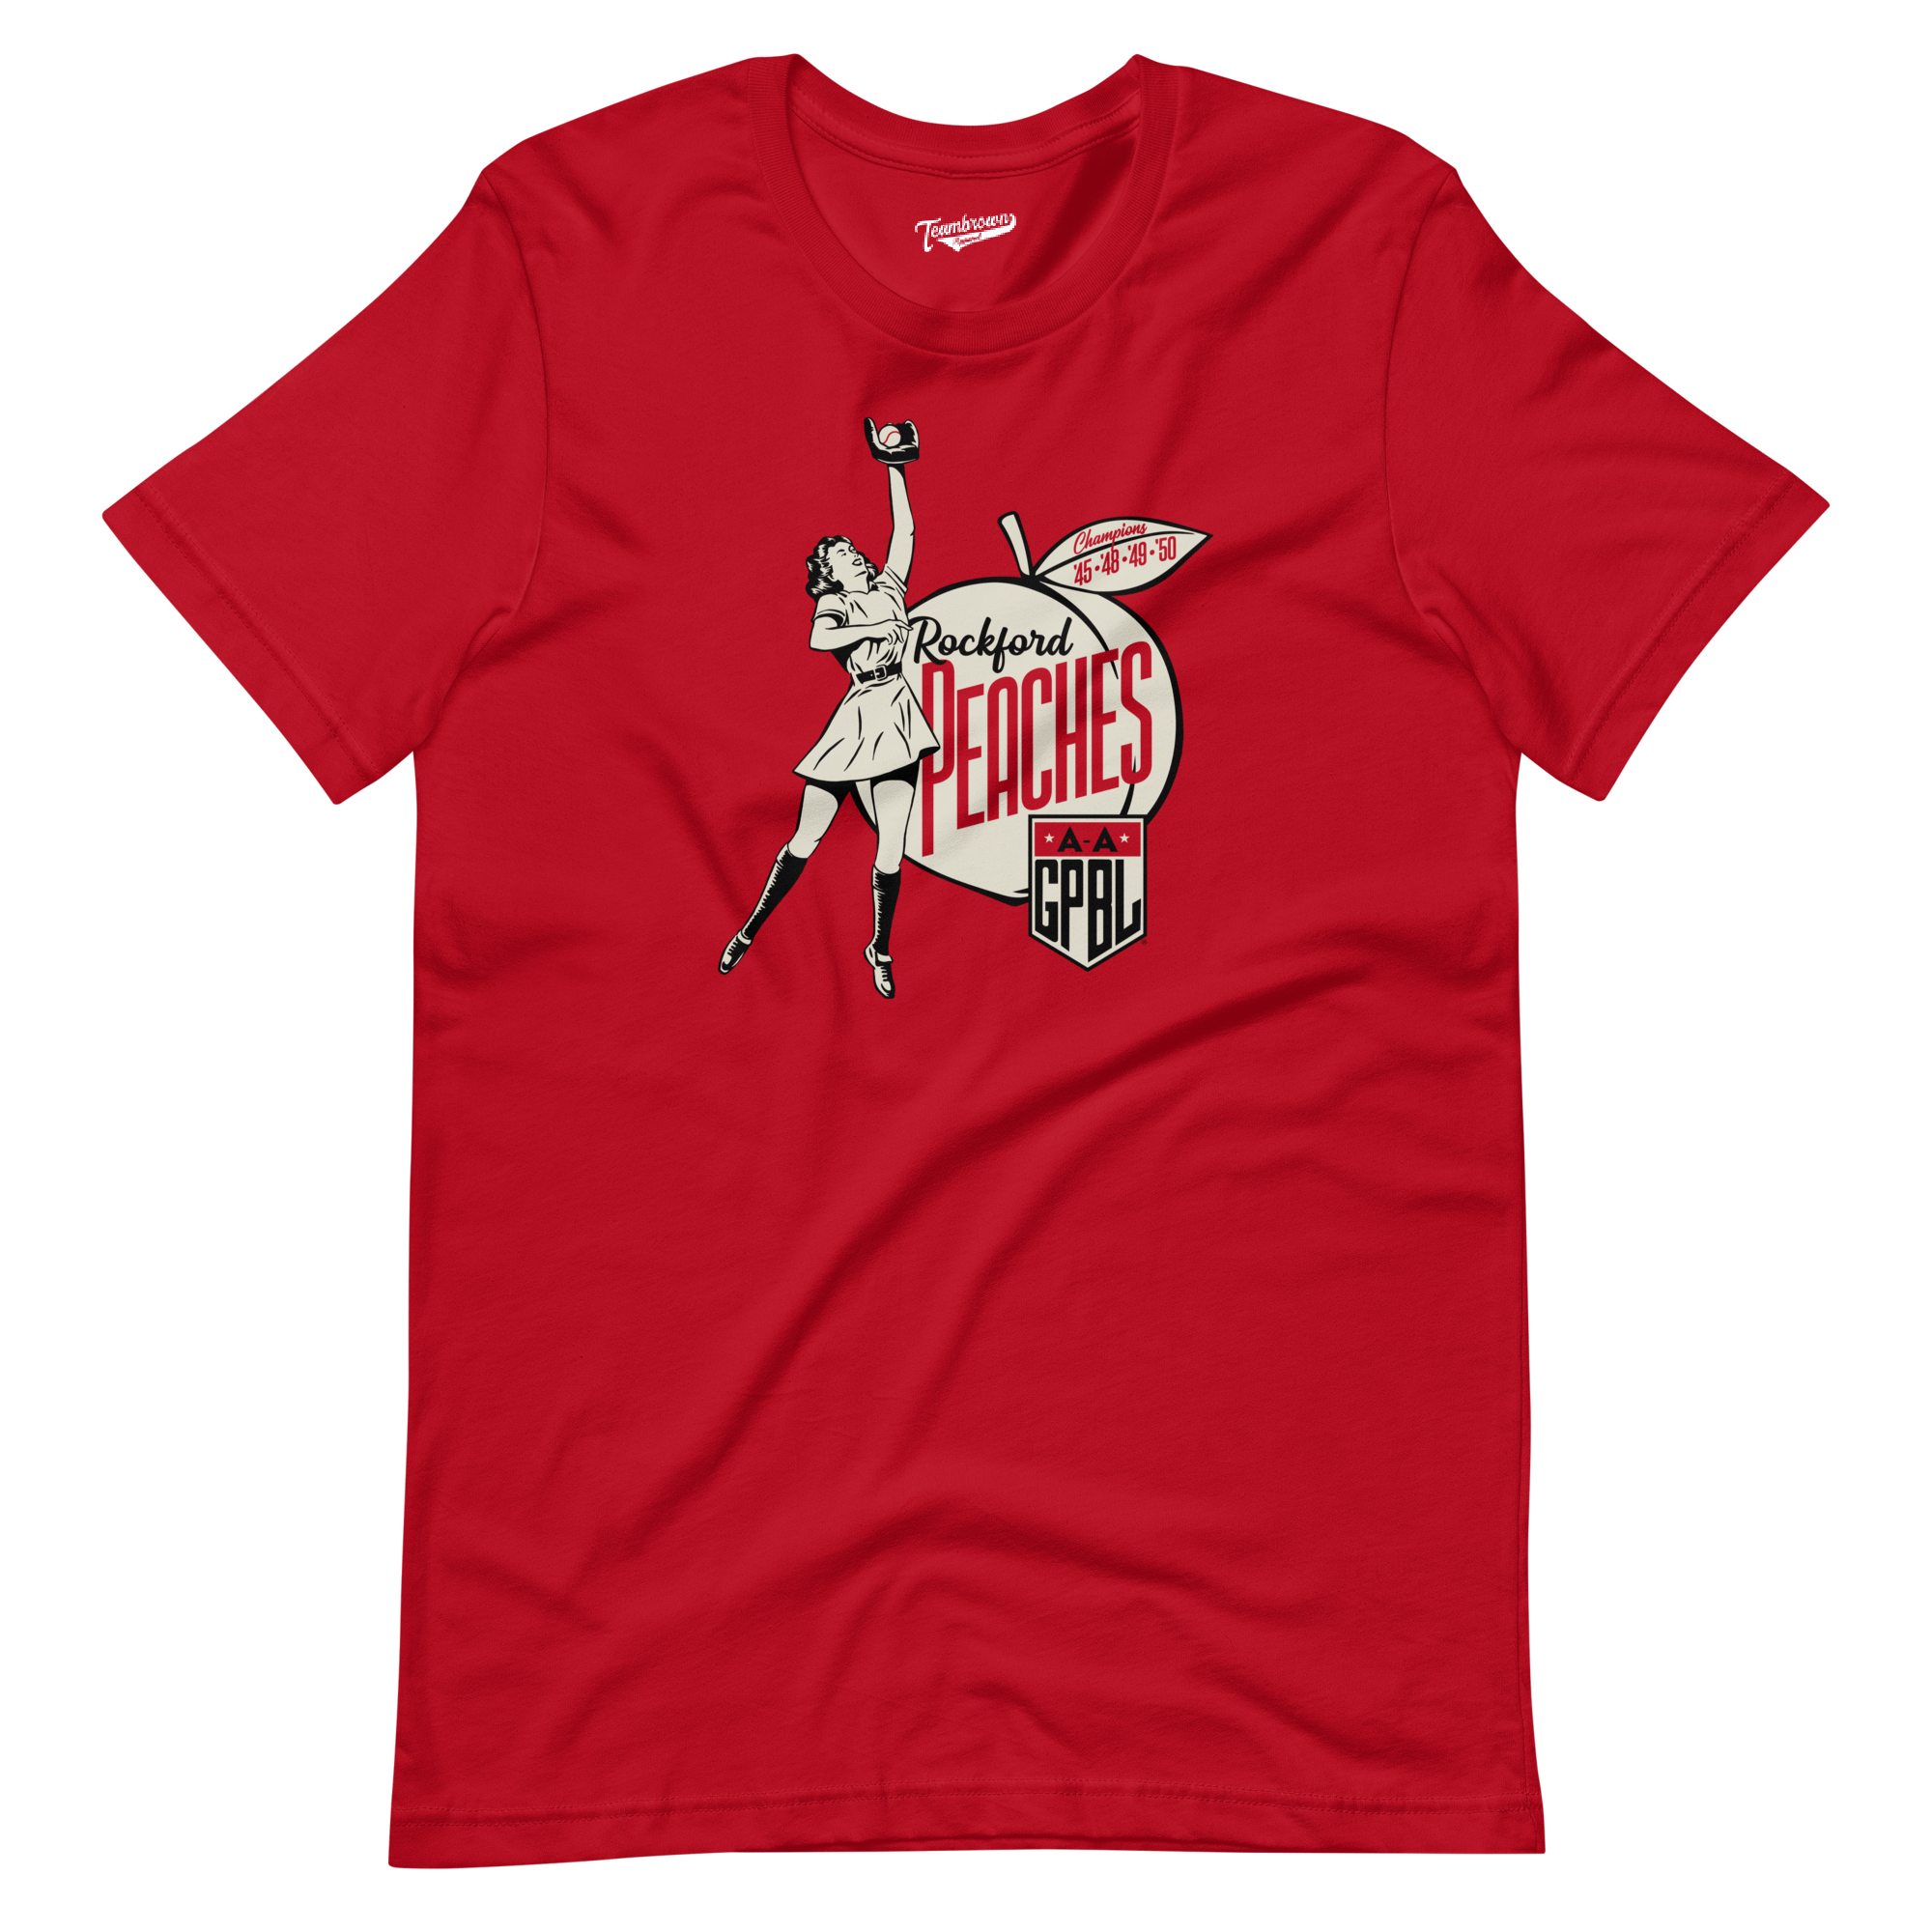 Diamond - Rockford Peaches - Unisex T-Shirt | Officially Licensed - AAGPBL